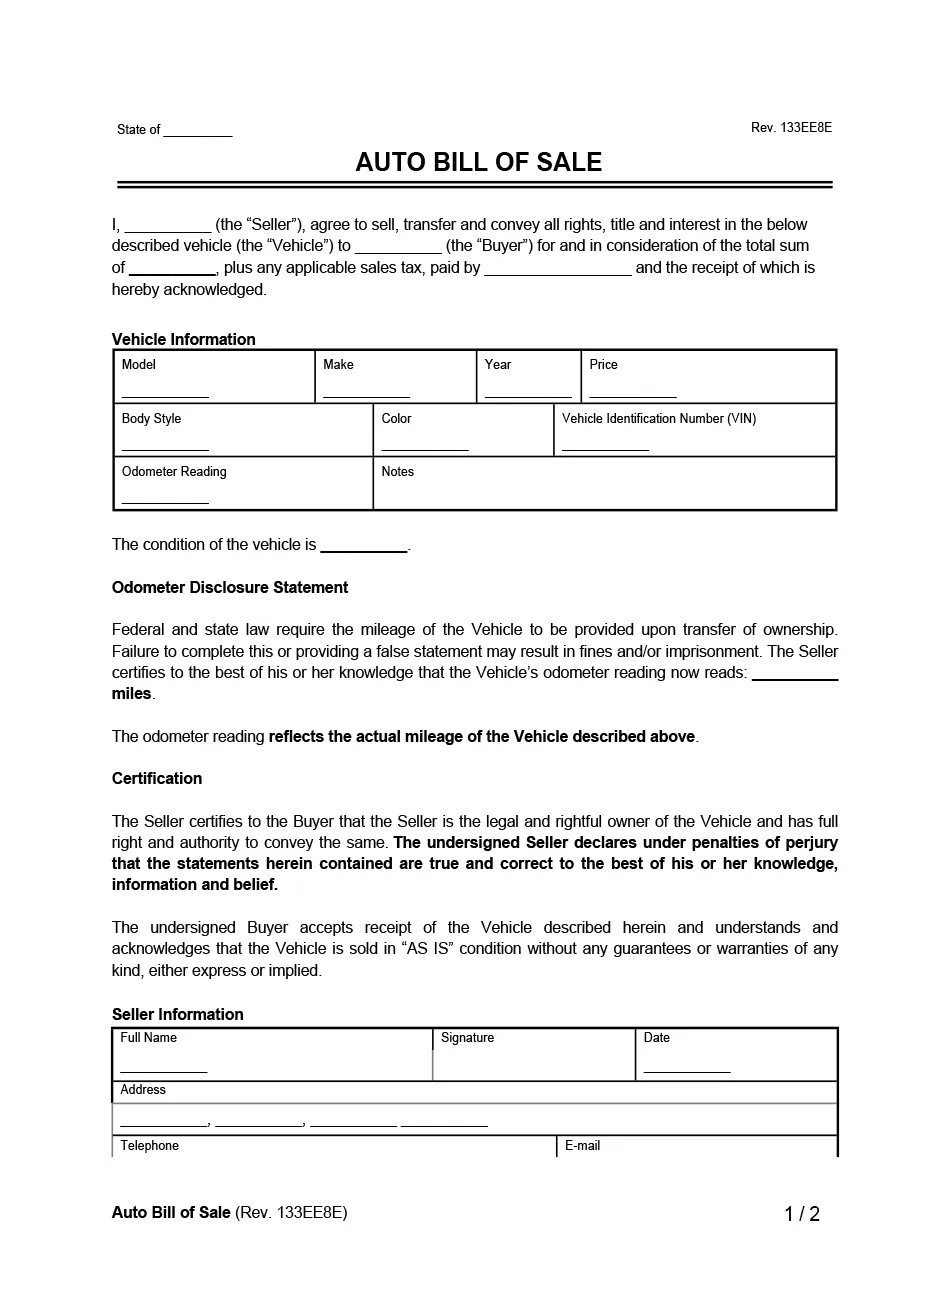 Auto Bill of Sale Example Form